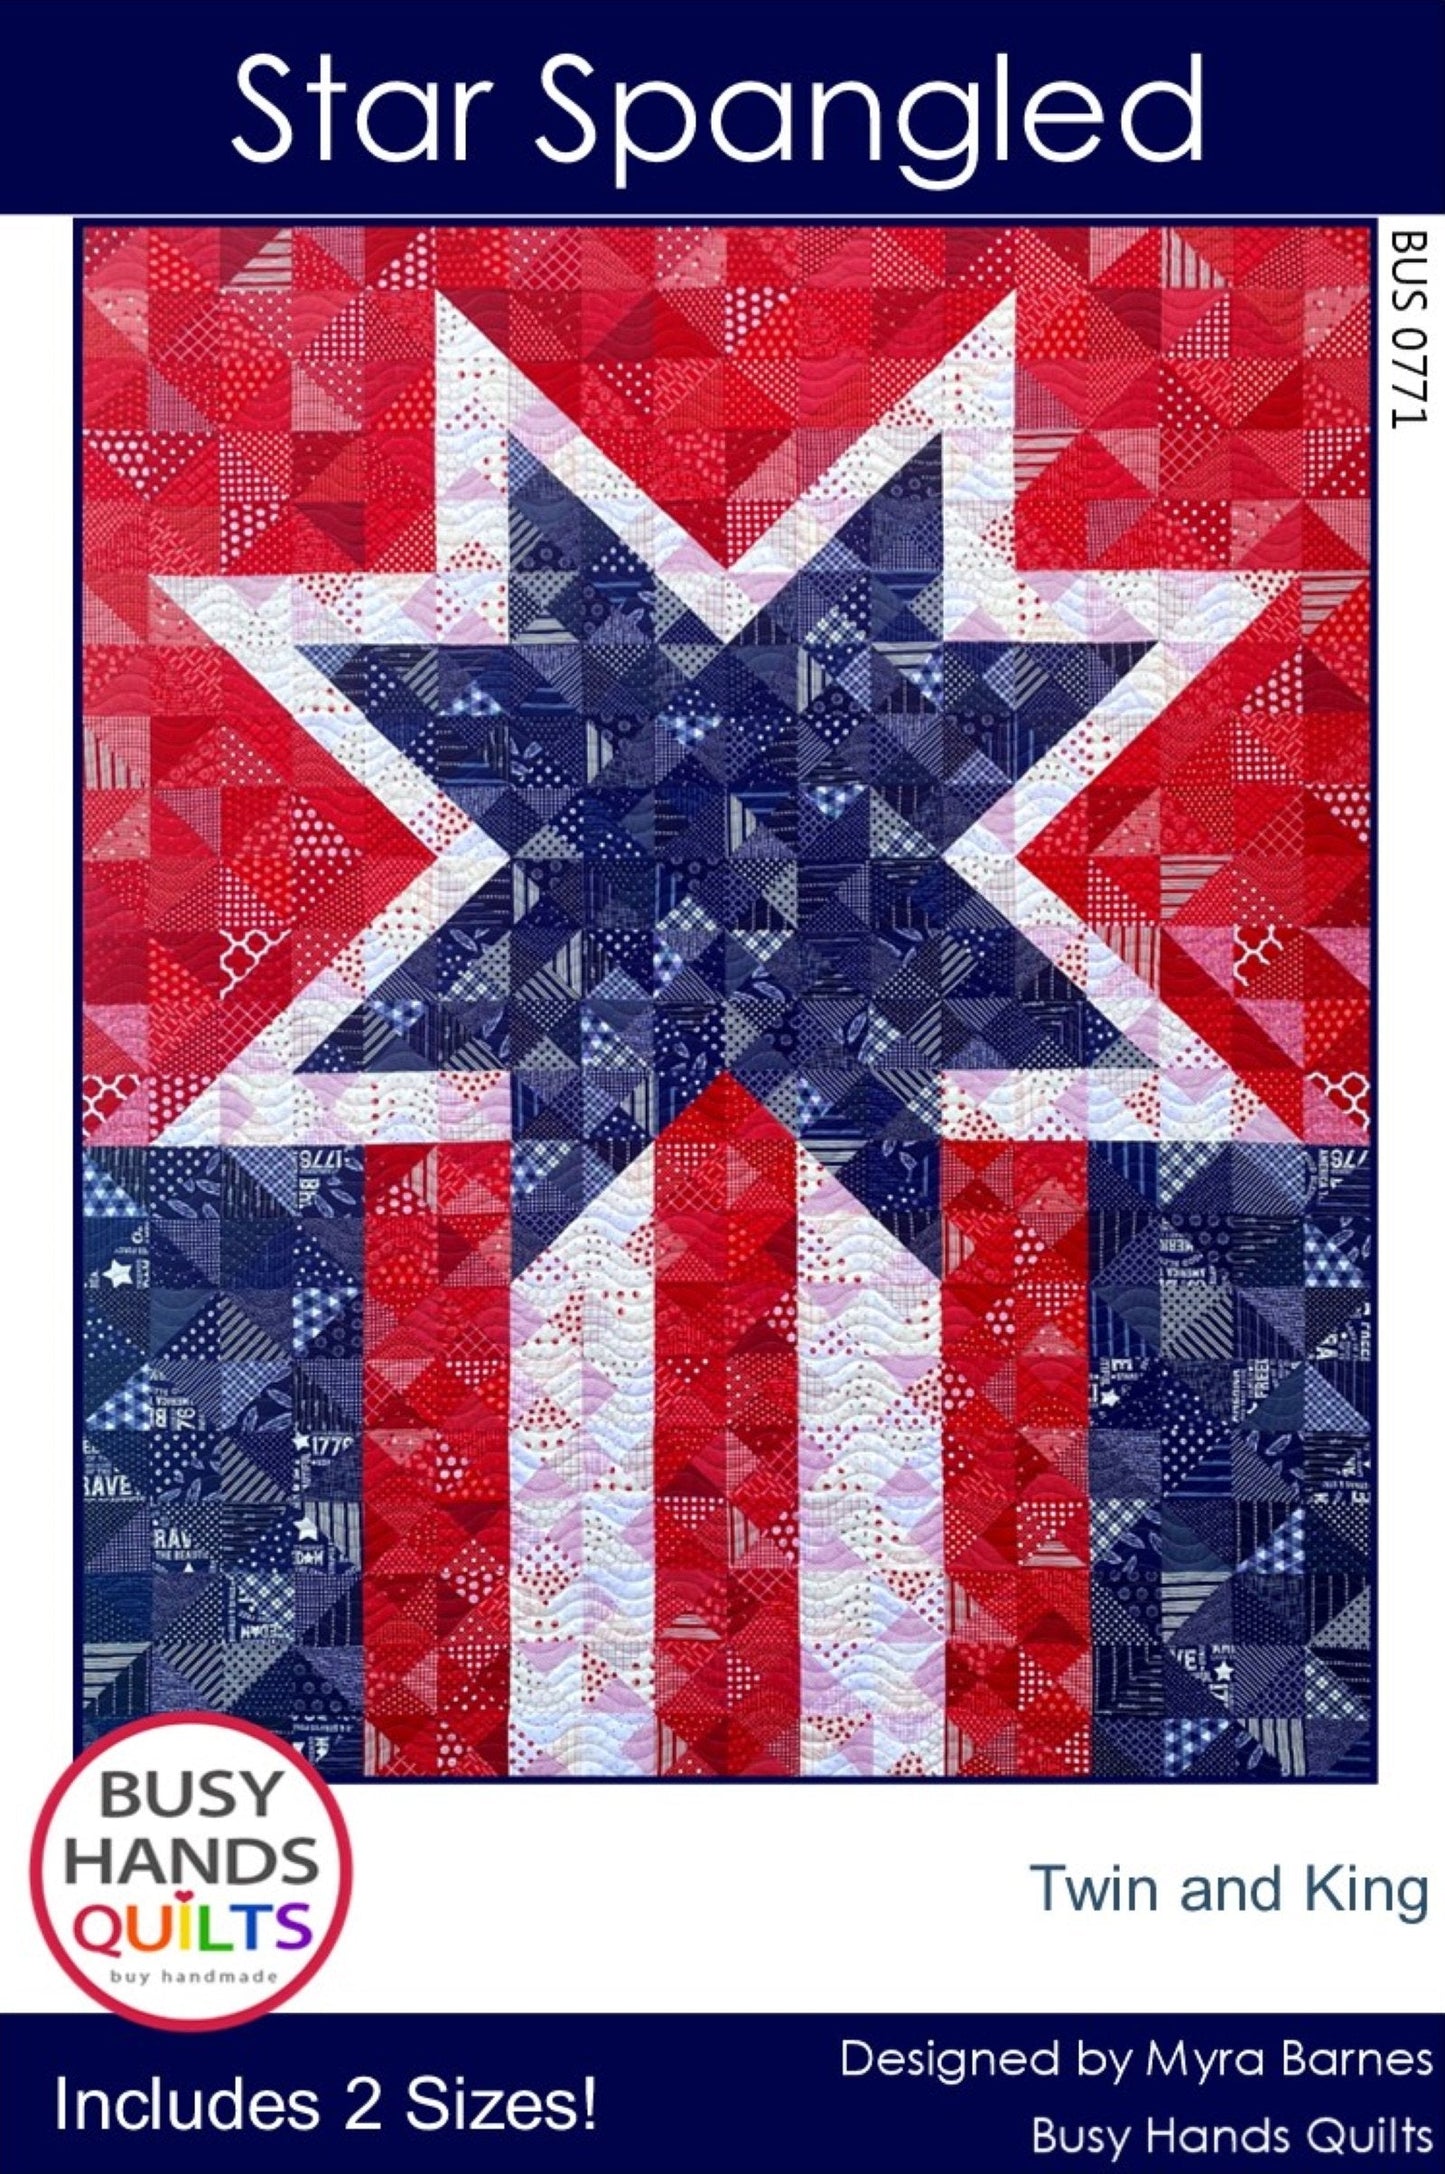 Star Spangled Quilt Pattern PDF DOWNLOAD Busy Hands Quilts $12.99